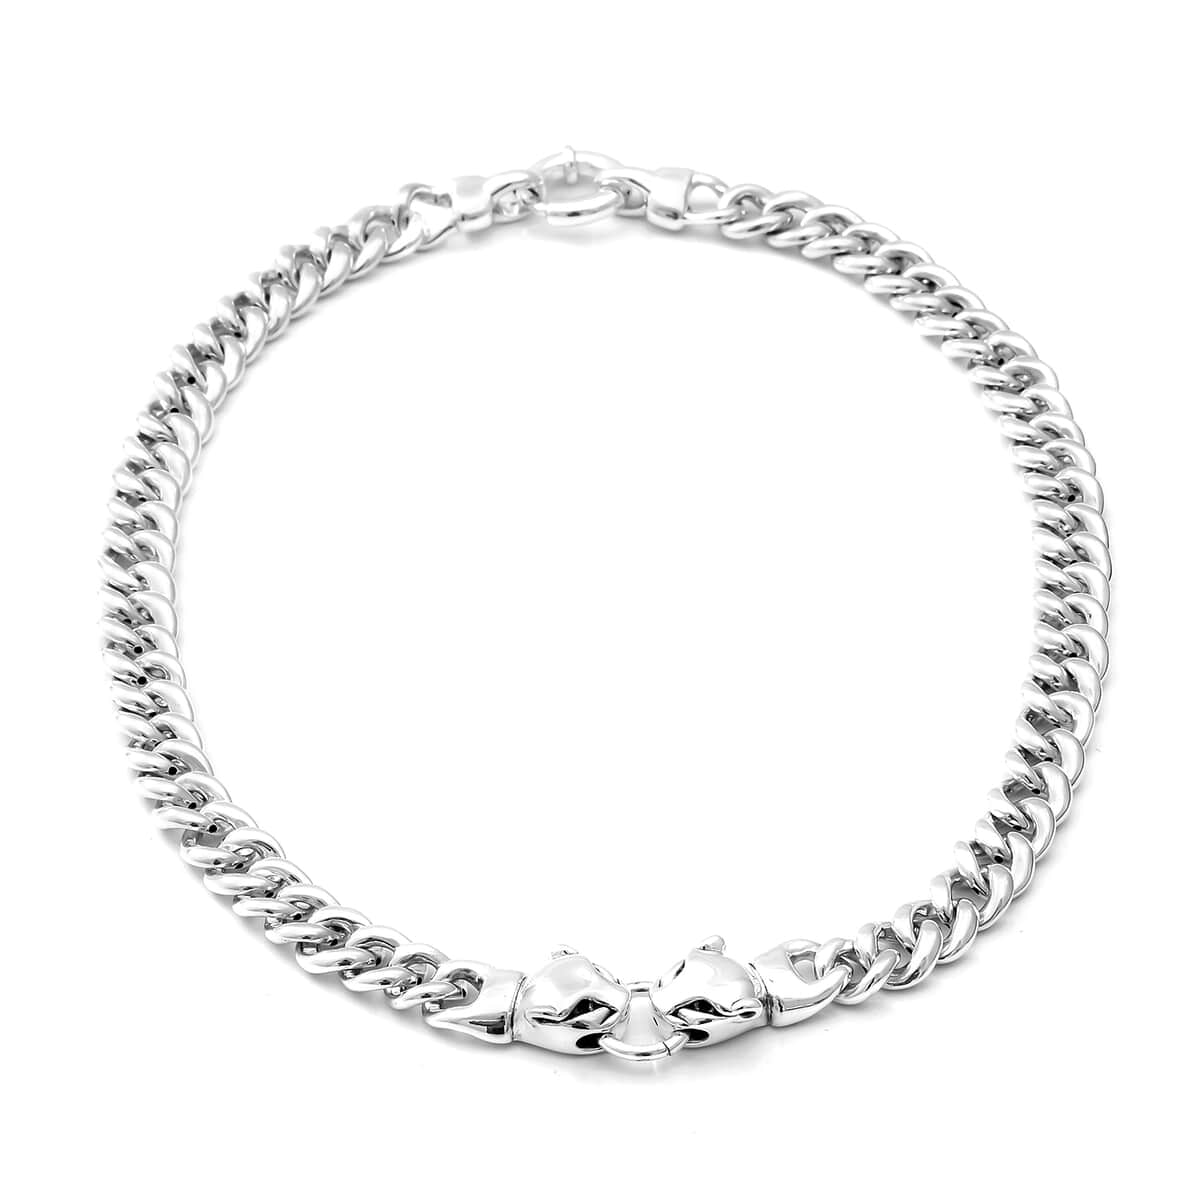 Designer Inspired Oversized Sterling Silver Statement Panther Curb Necklace 19.5 Inches 47.80 Grams image number 0